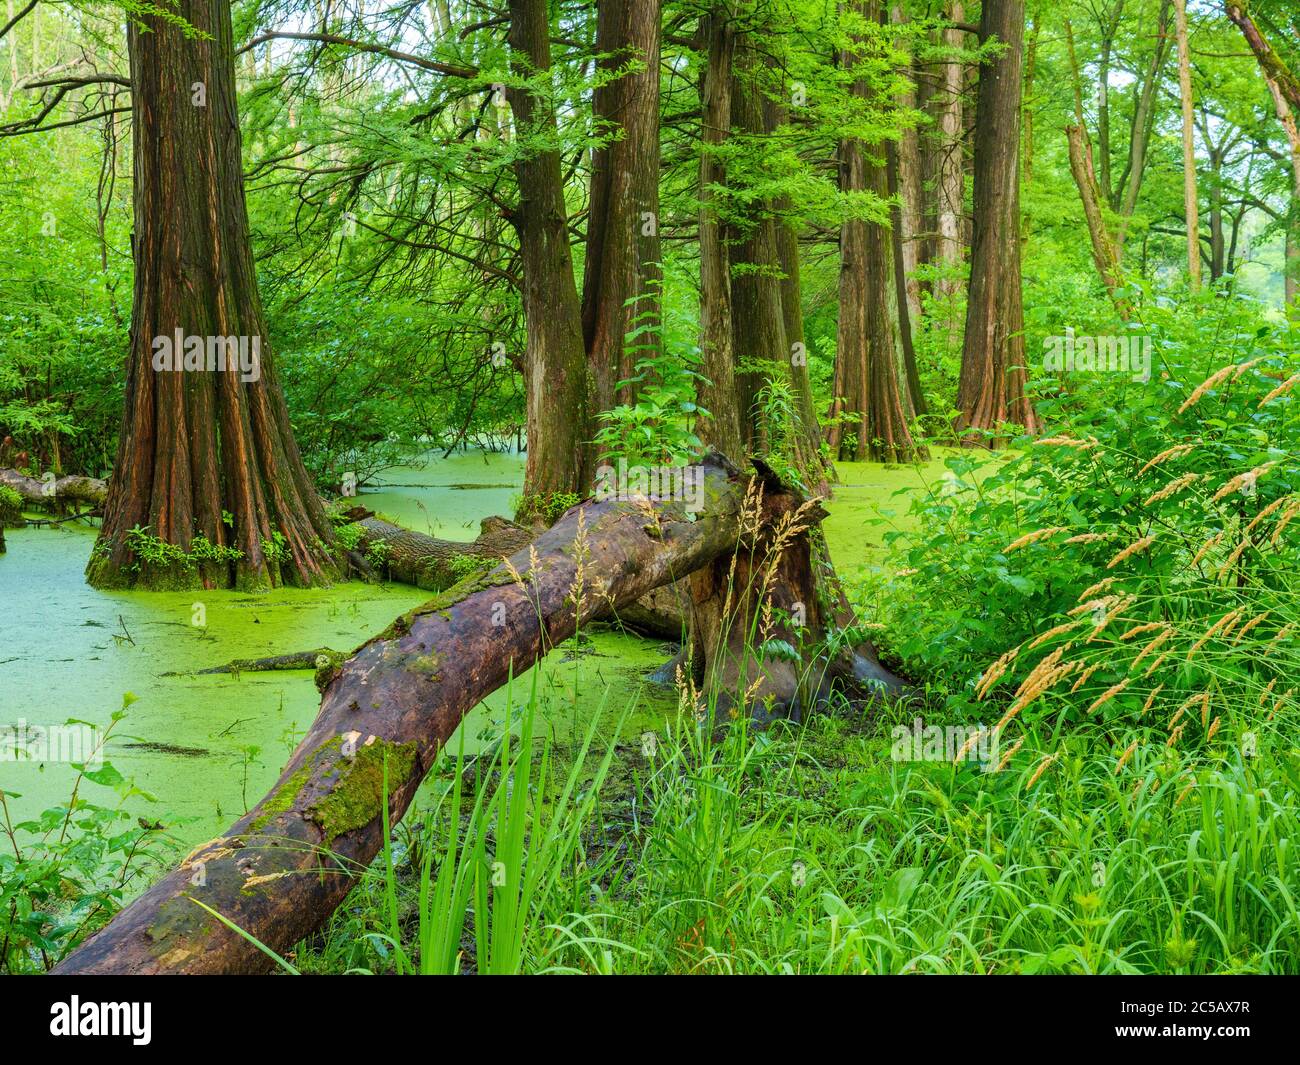 Bald cypress swamp, Cook County Illinois. Planted by the Civilian Conservation Corps in the 1930s. Stock Photo